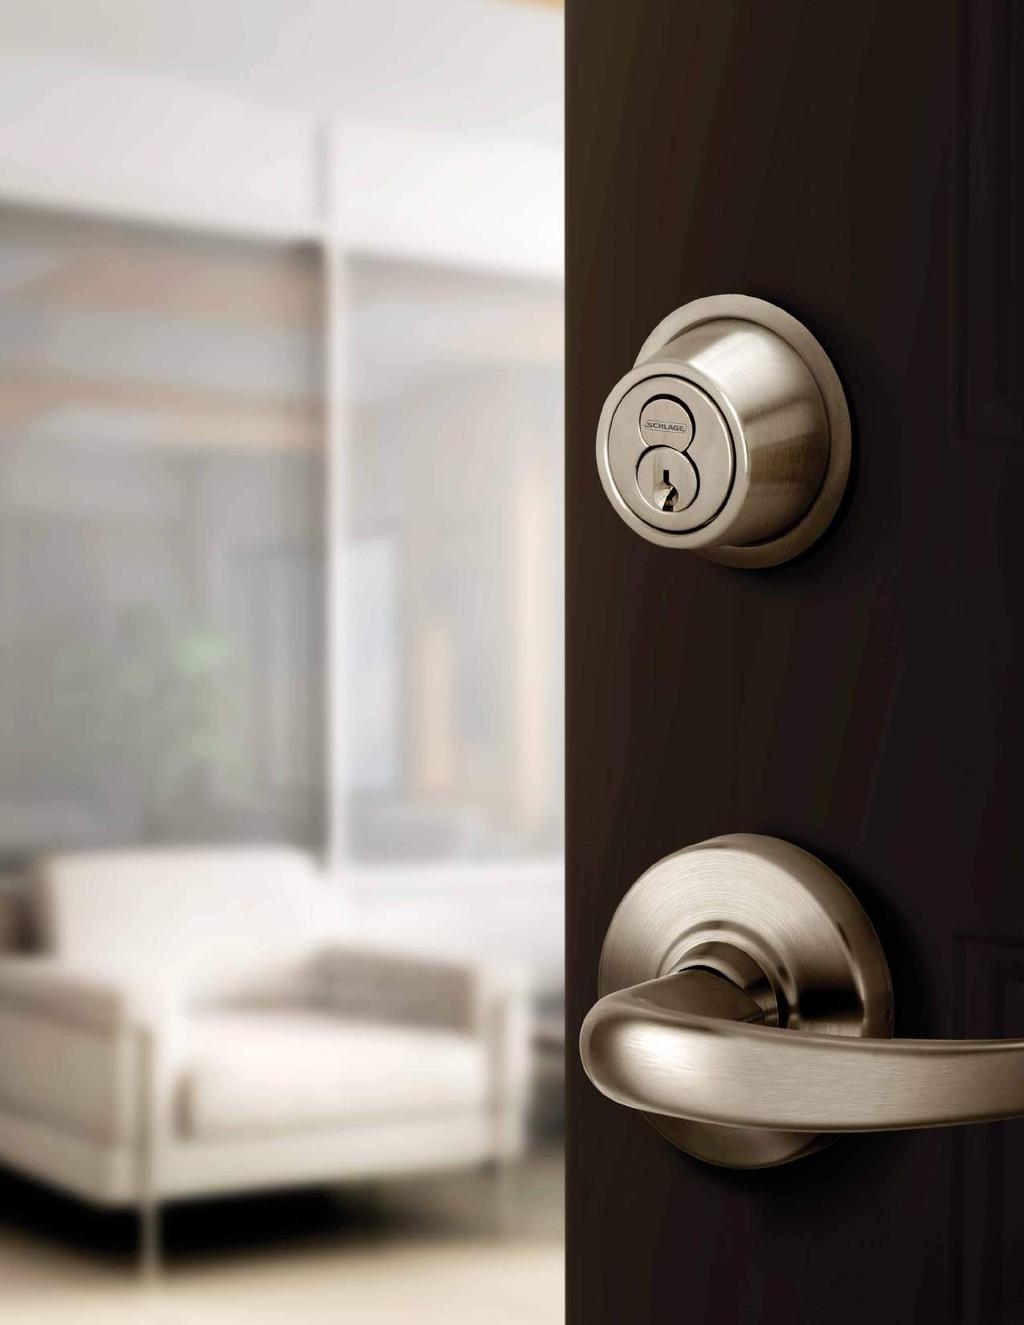 B Series B250 deadlatches B500 deadbolts B600/700/800 deadbolts Auxiliary locks for added security Auxiliary locks not only provide added protection for exterior entrance doors, they can also protect